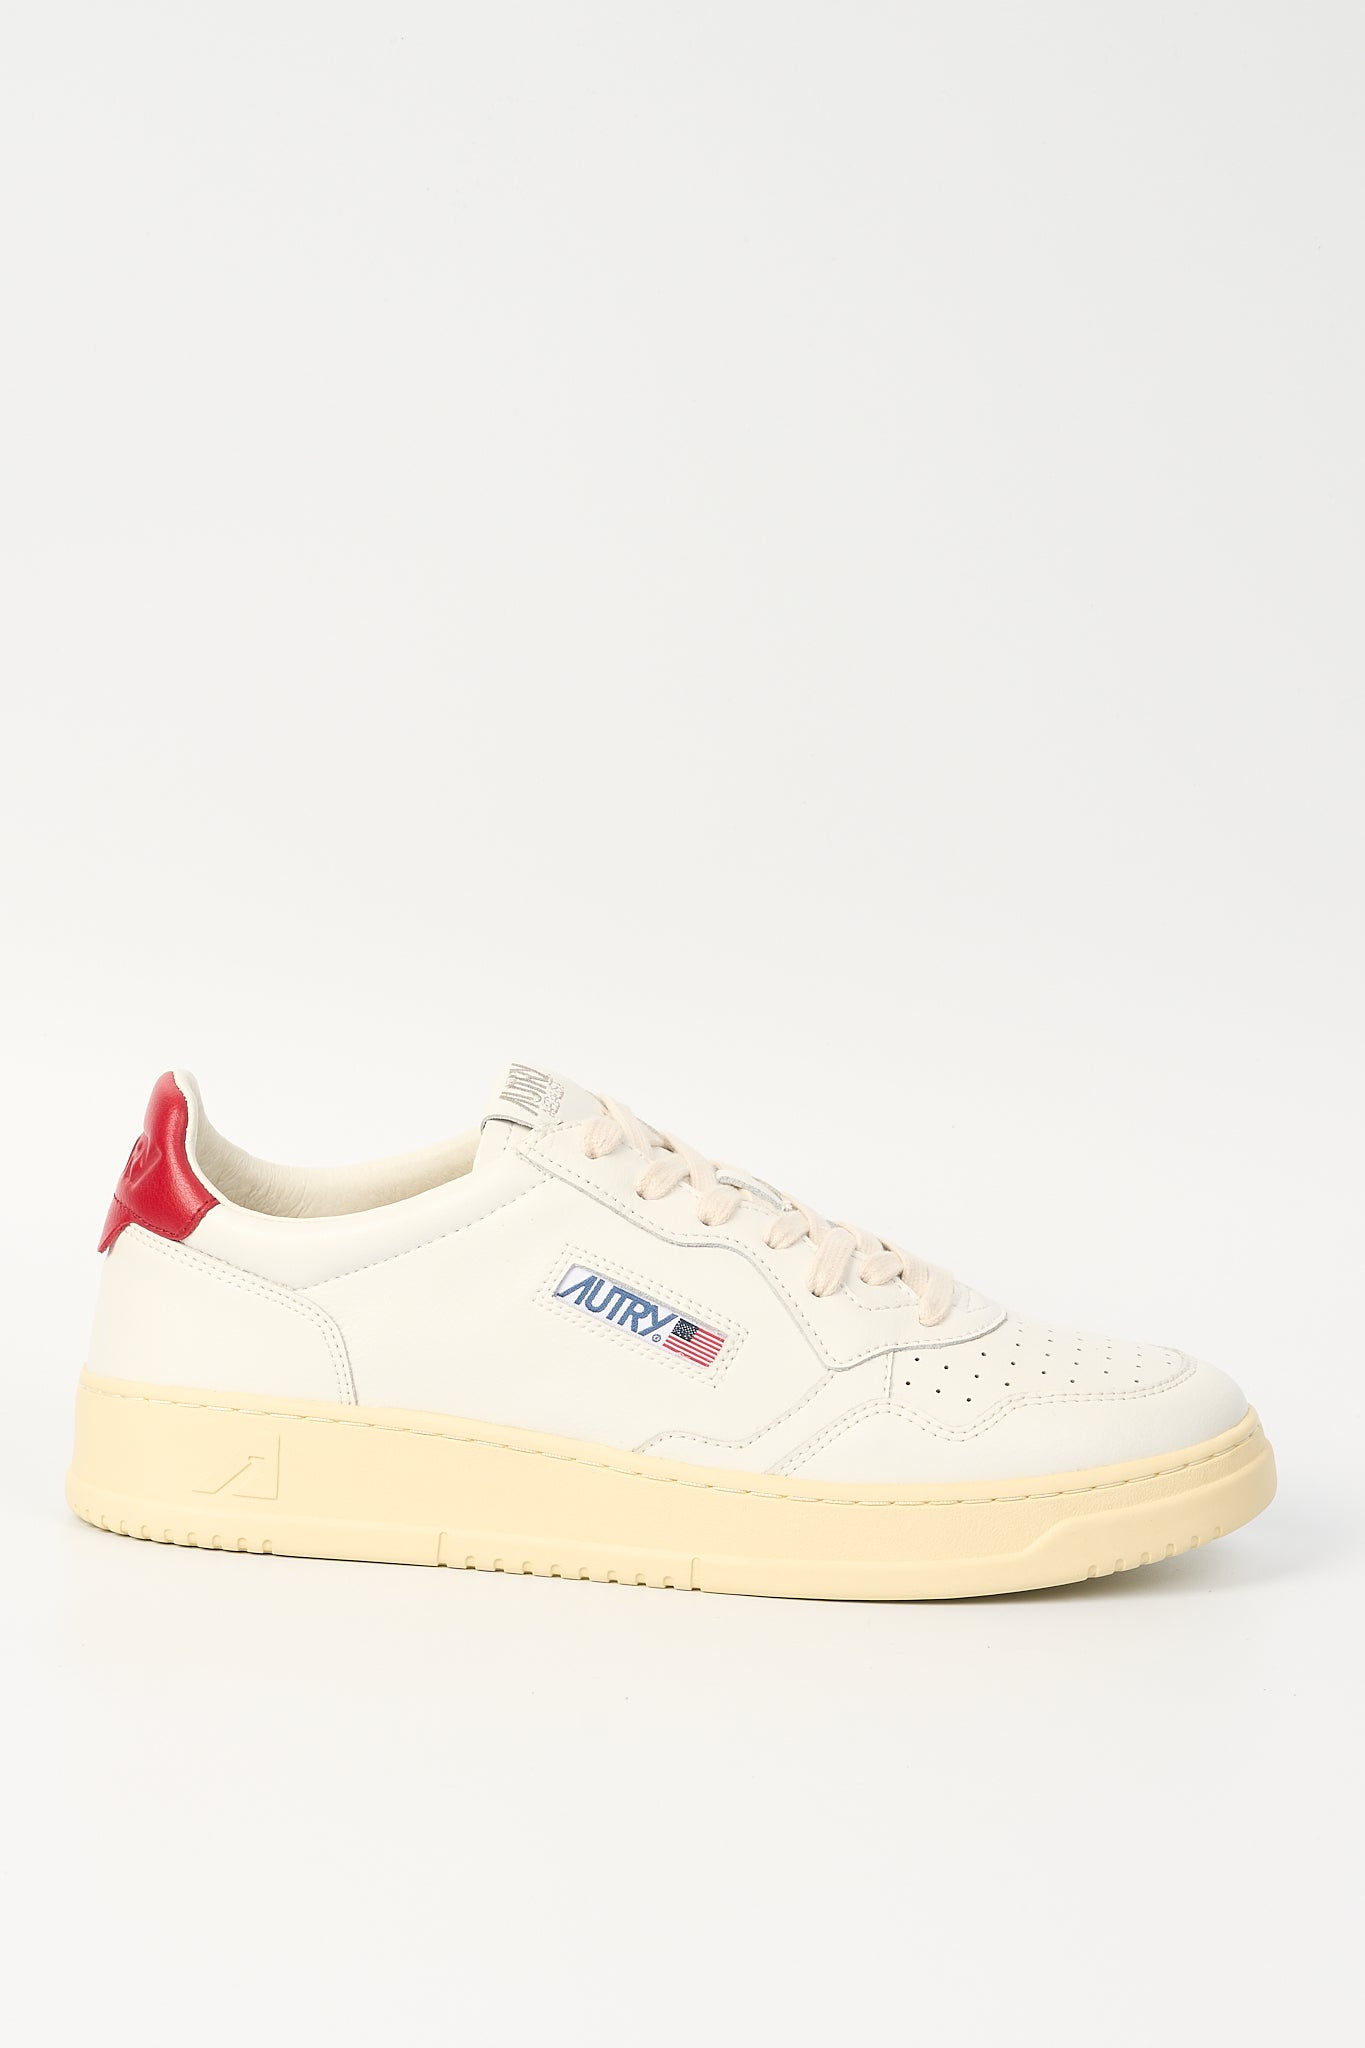 Autry Sneaker Medalist AULM-LL21 Bianco/rosso Uomo-1